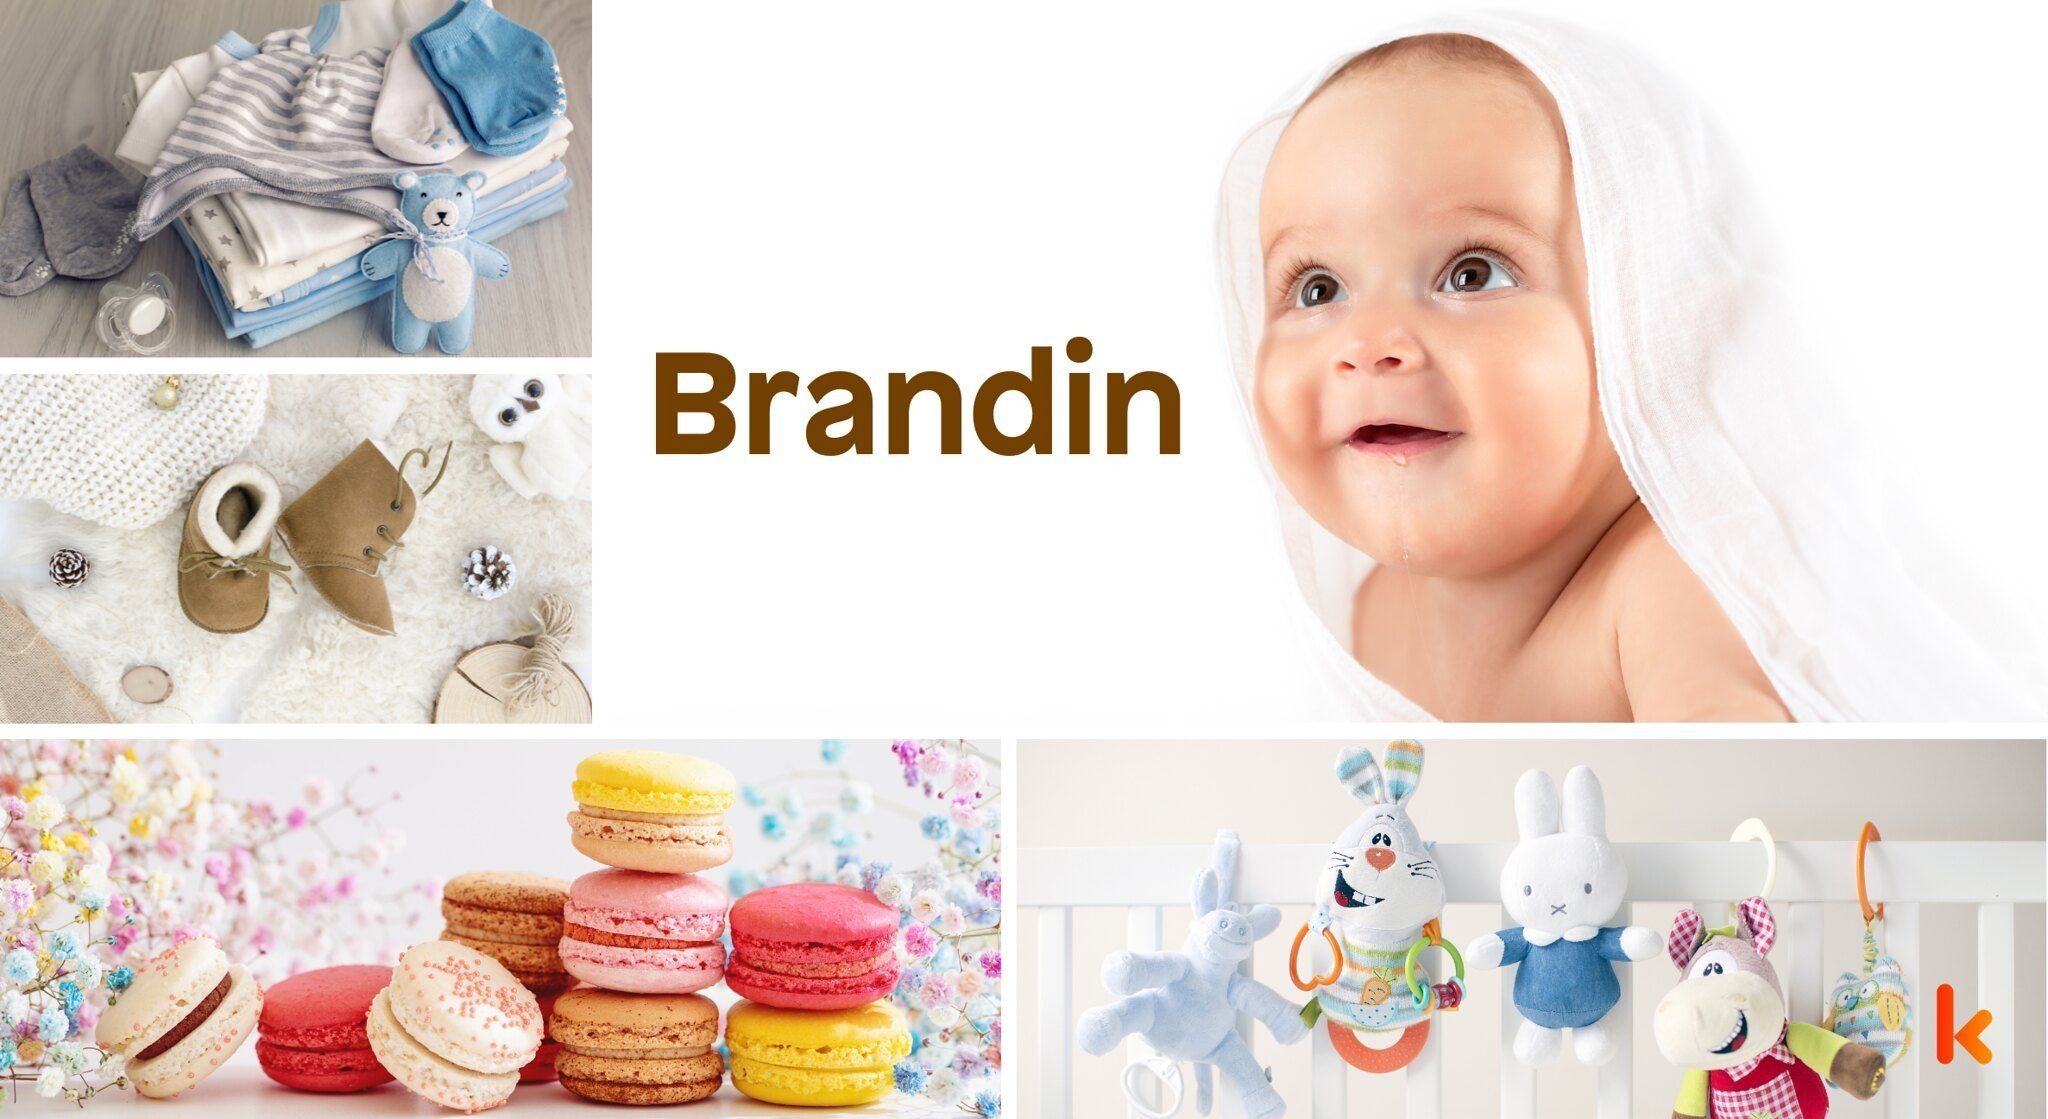 Meaning of the name Brandin